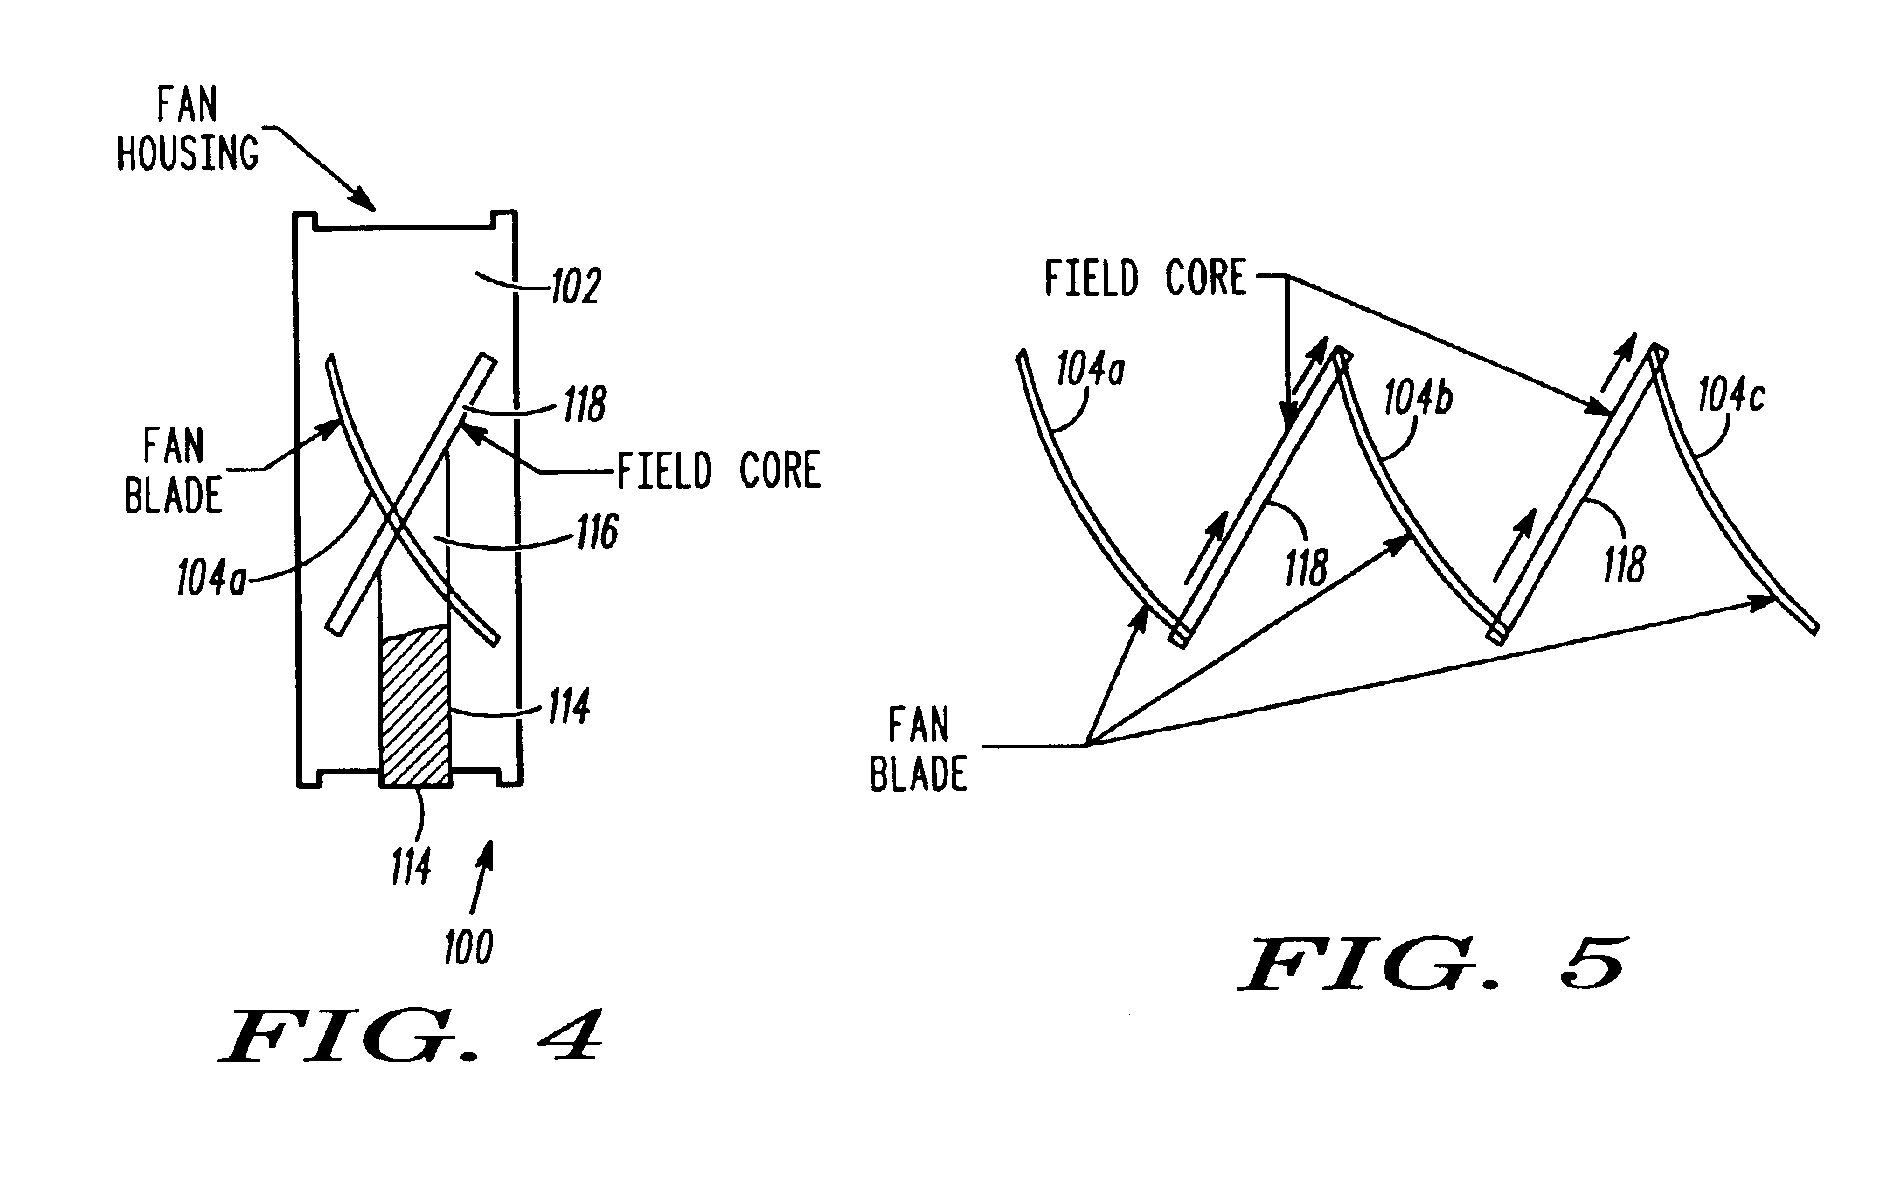 Magnetically driven air moving apparatus, with magnetically tipped fan blades and a single field coil and core